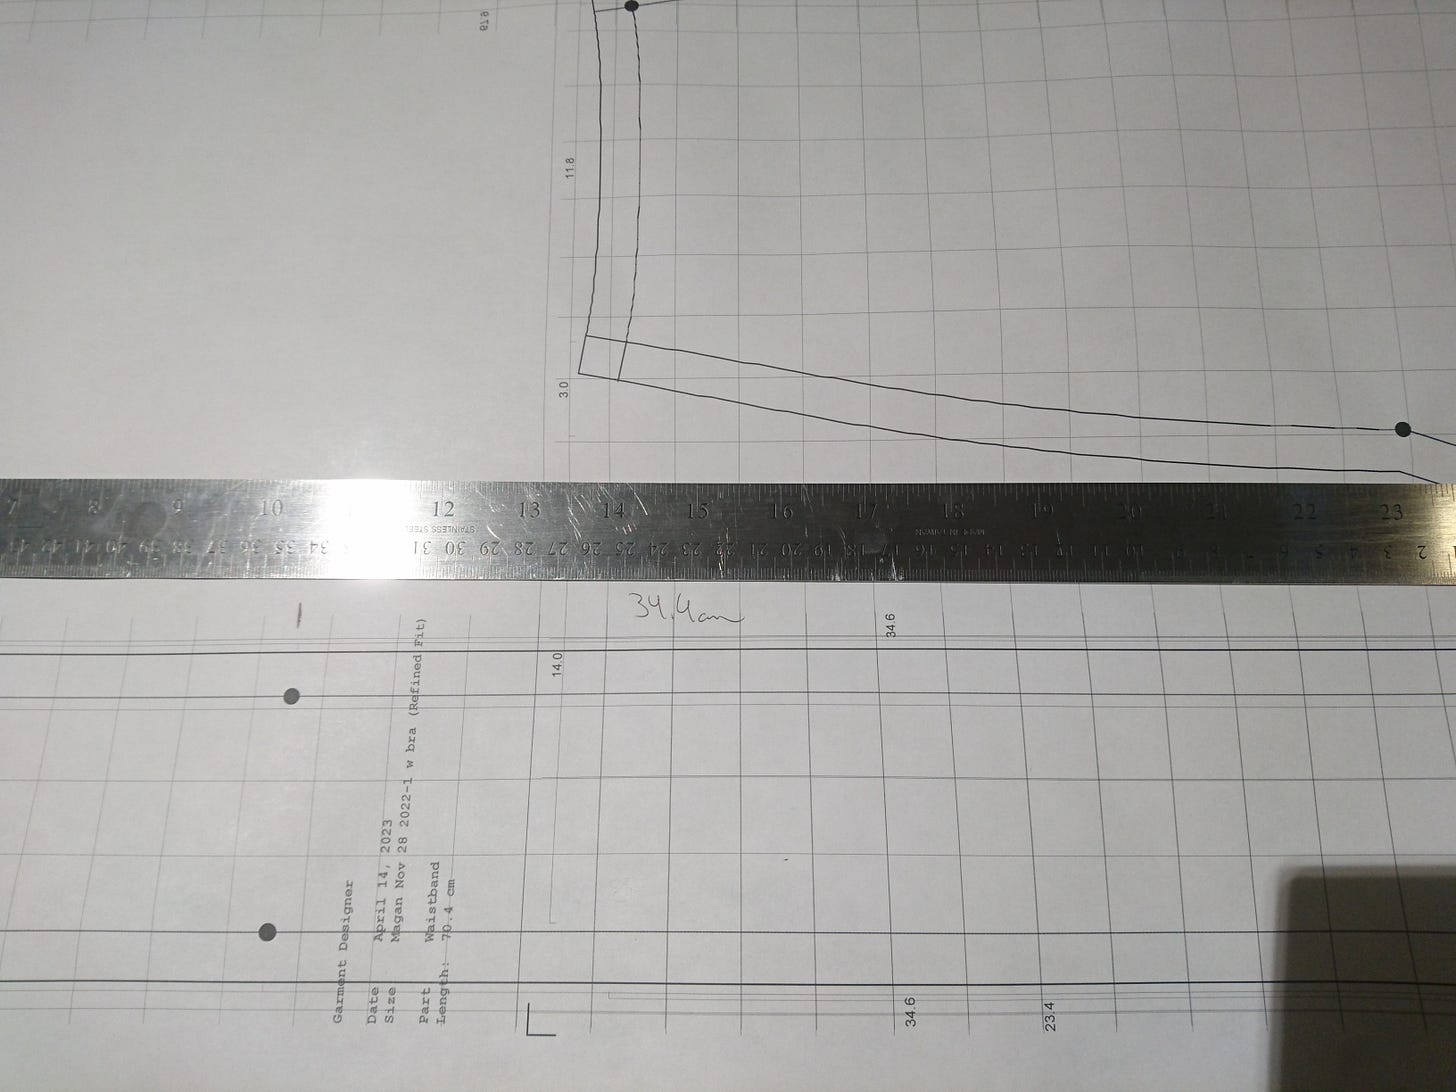 flat patterns with a ruler on top measuring the distance, with hand scrawled notes on top